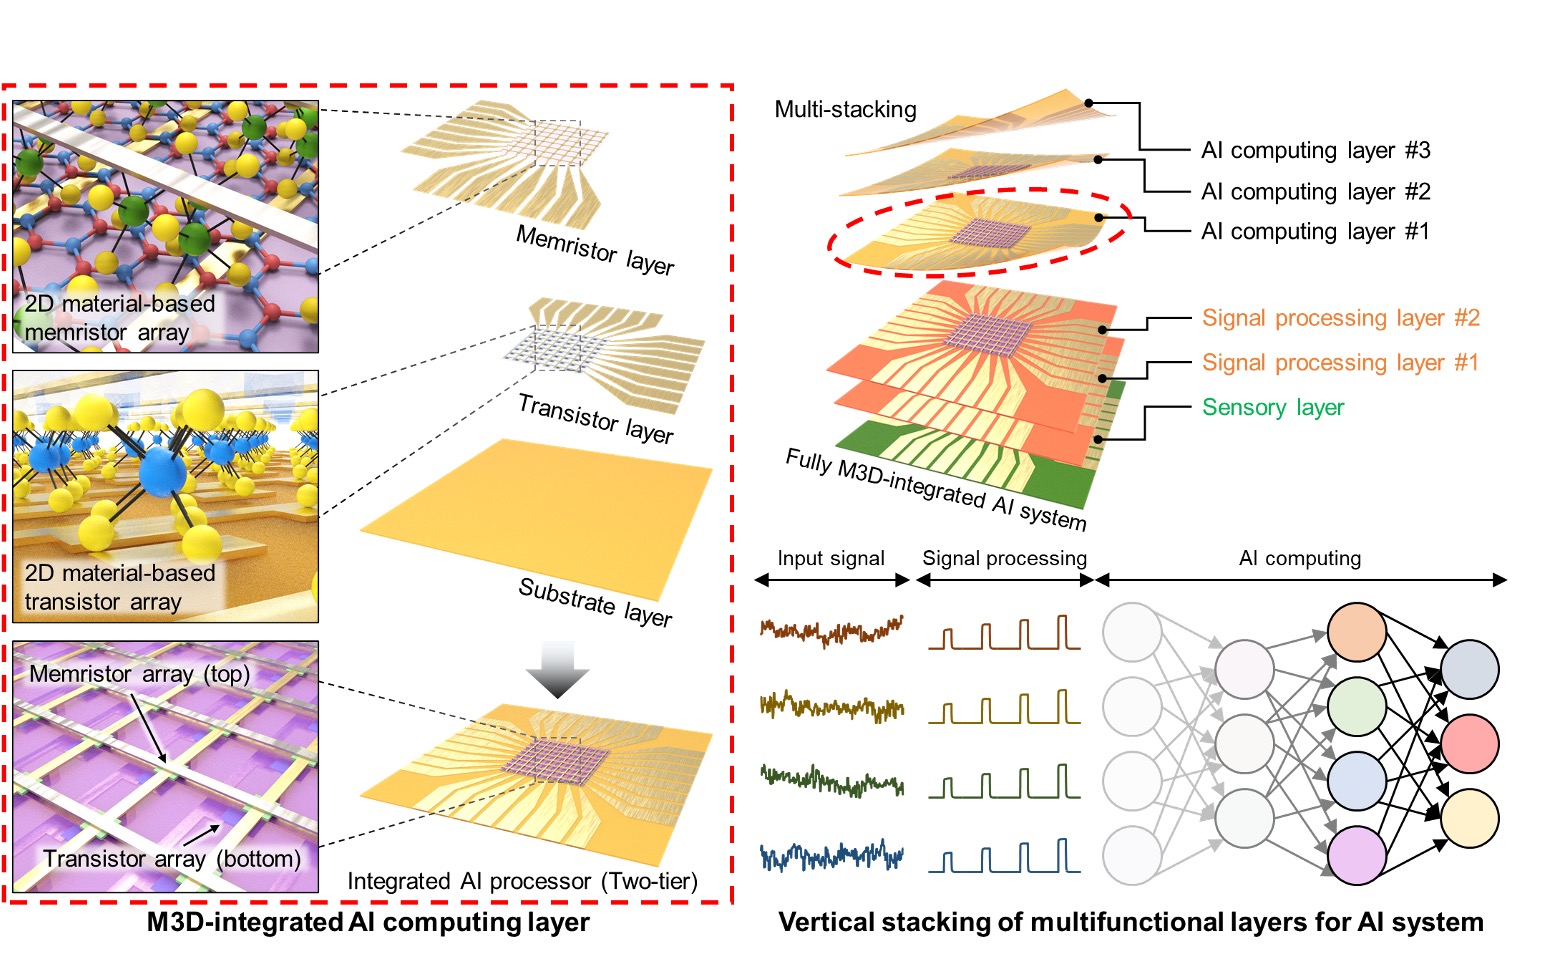 Schematic illustration of an edge computing system based on monolithic 3D-integrated, 2D material-based electronics